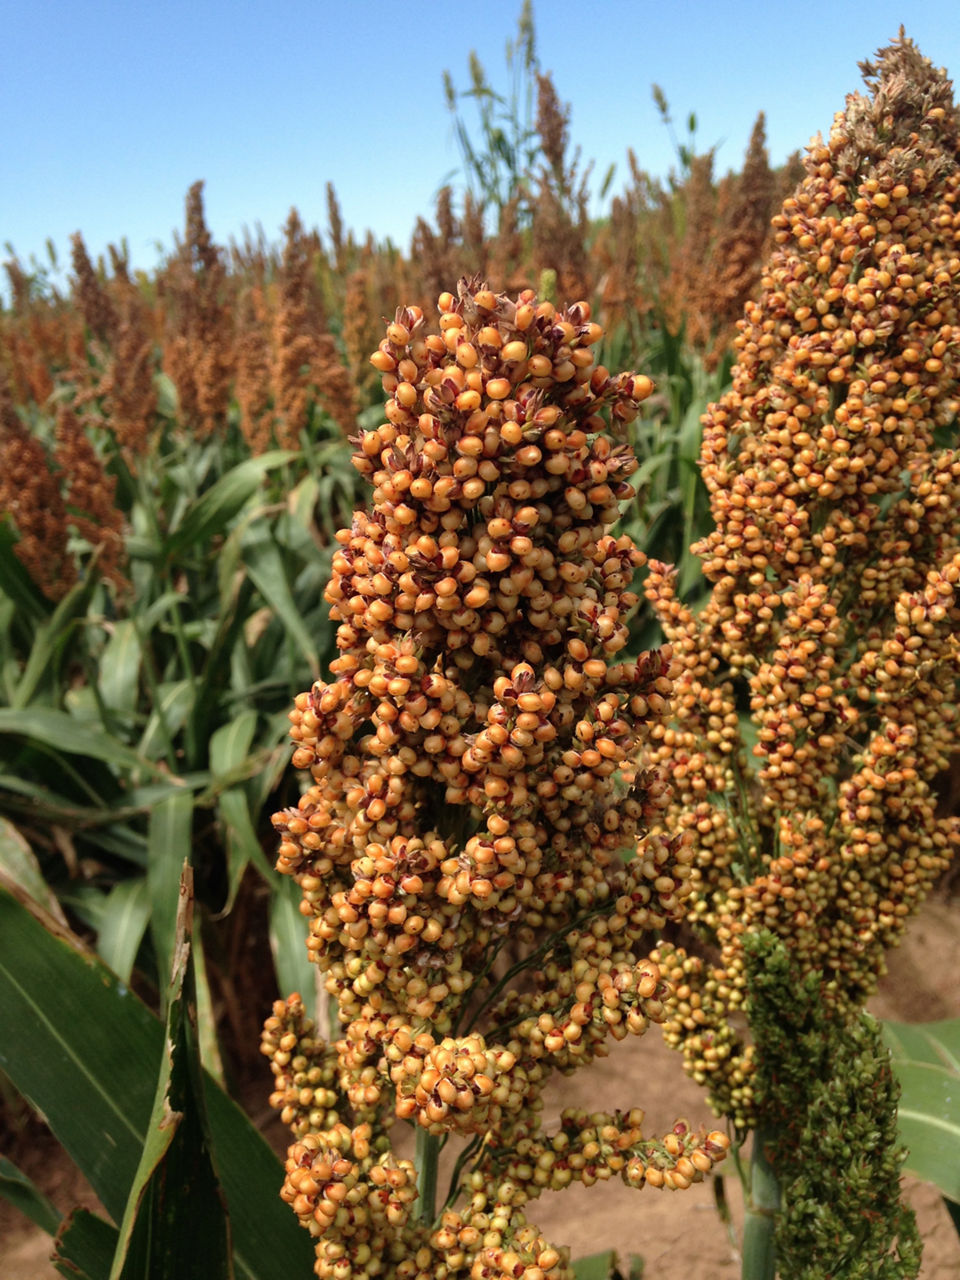 Figure 5. Bronze colored grain sorghum head in in hard dough growth stage. Photo courtesy of the United Sorghum Checkoff Program, Growth and Development 